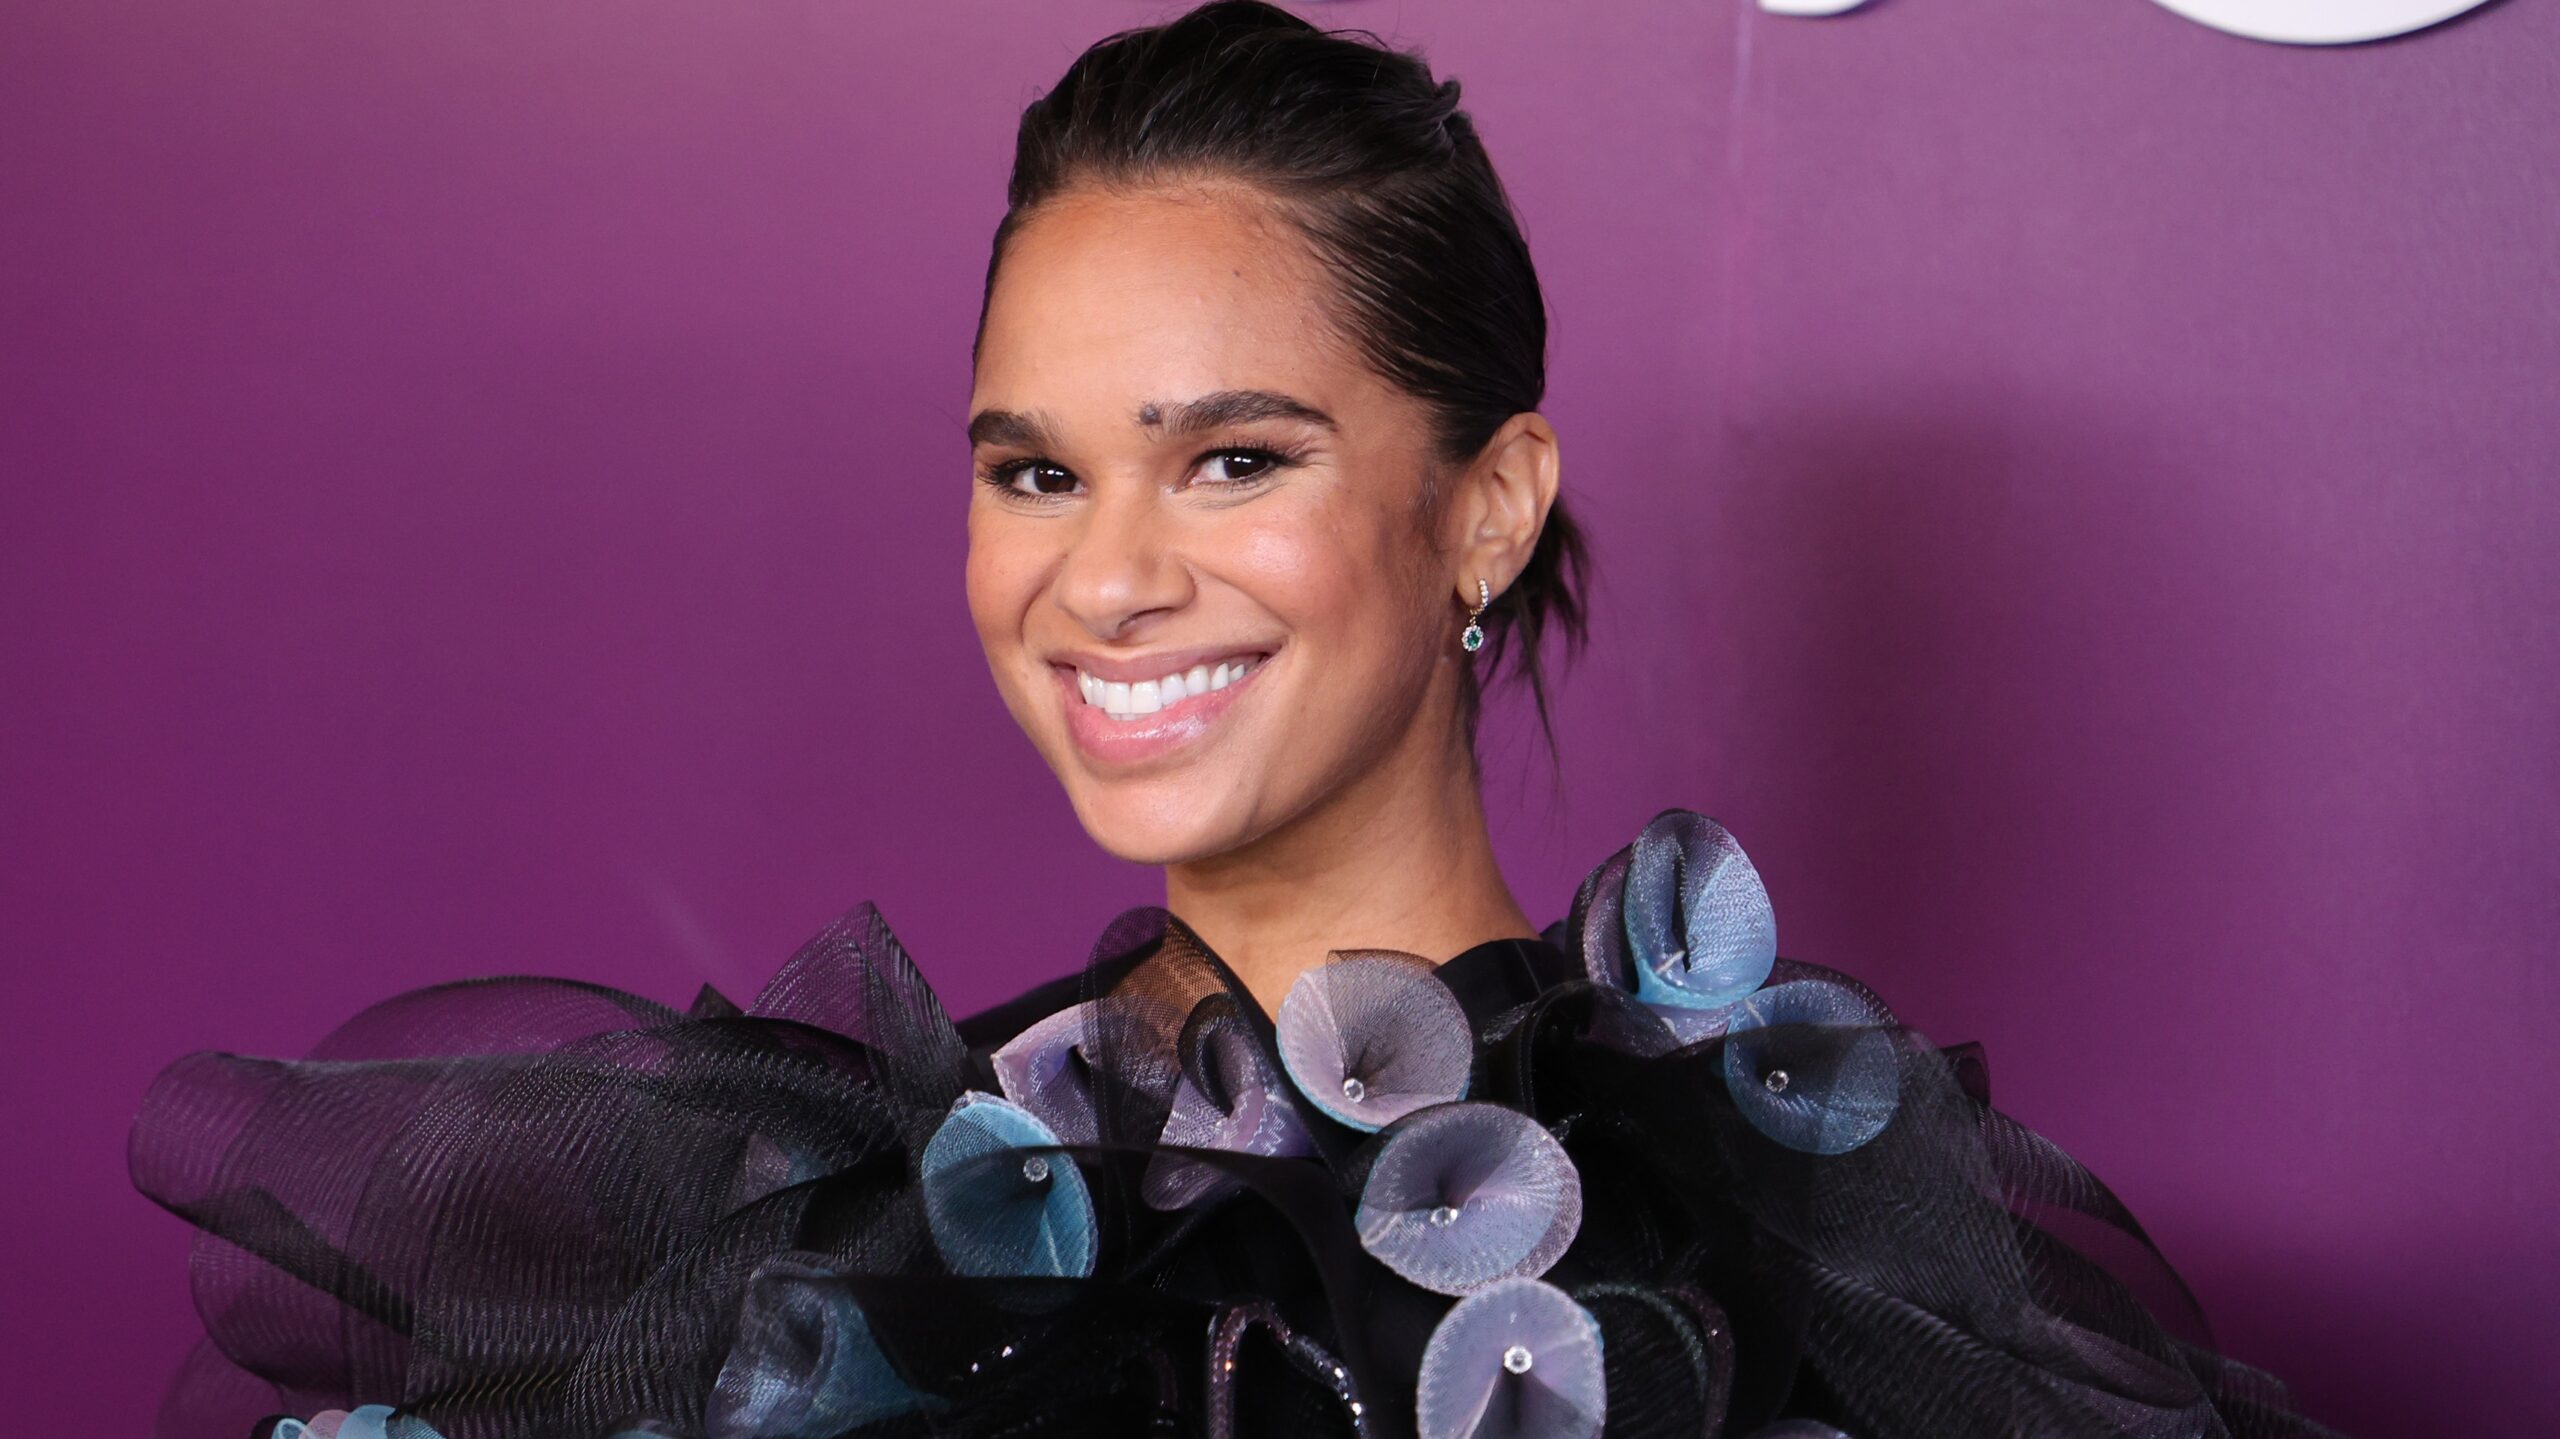 Misty Copeland Credits Prince For Inspiring Her To Take Her Career To The Next Level